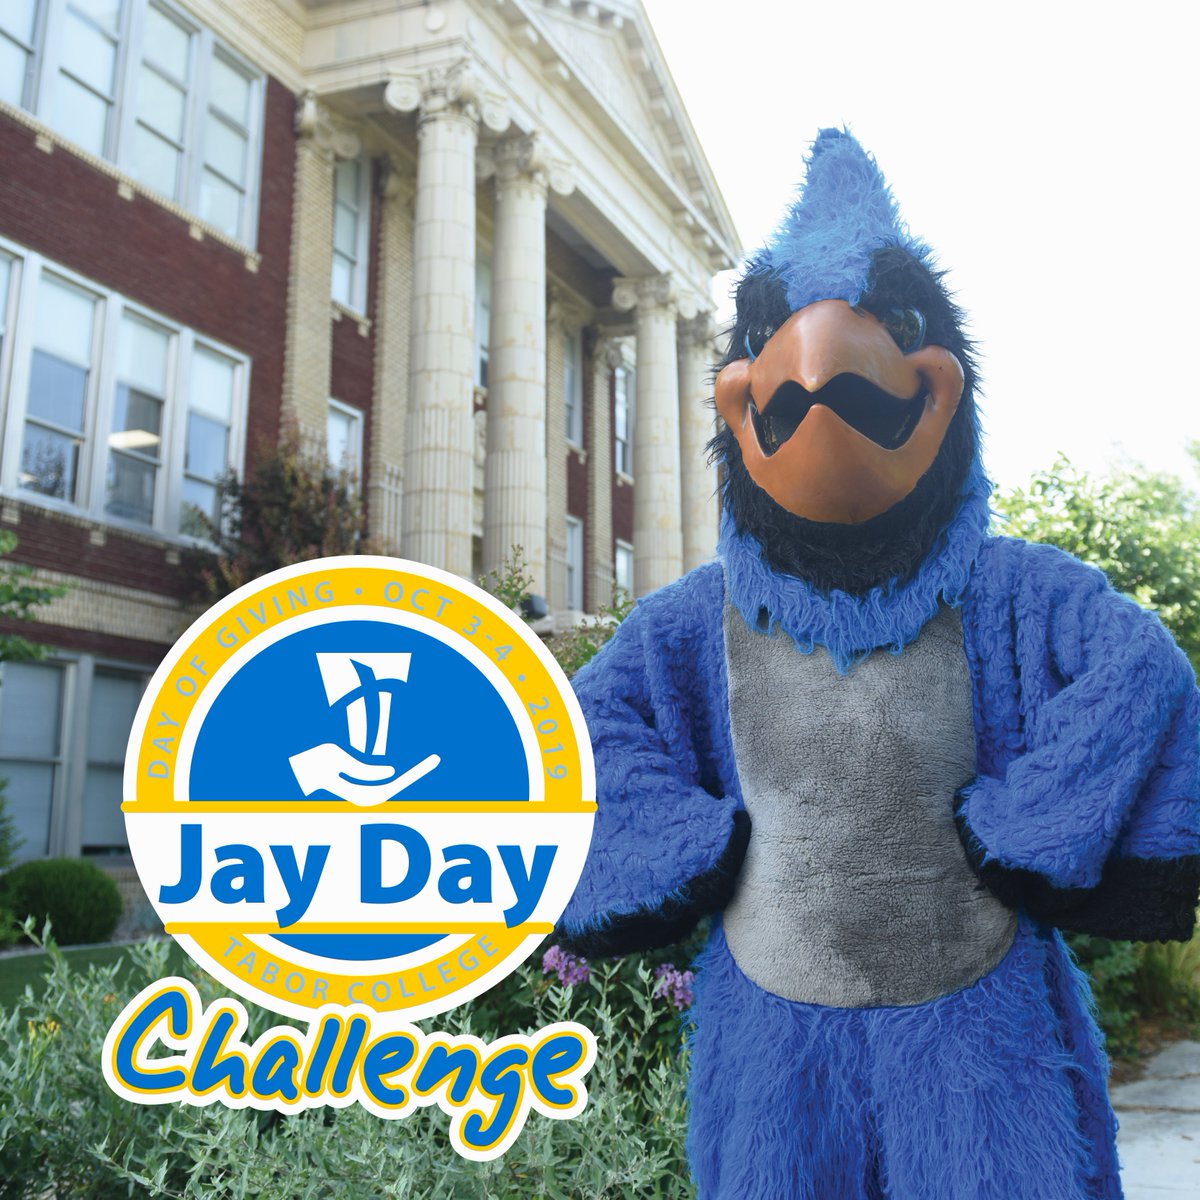 Goooood morning Bluejays! It's Jay Day! Thank you to the many people who have generously given so far! We are getting closer to our goal of $80,000! We are looking for 100 donors of any size to join us! Donate at tabor.edu/jayday or by texting 'jayday' 555888 #taborjayday